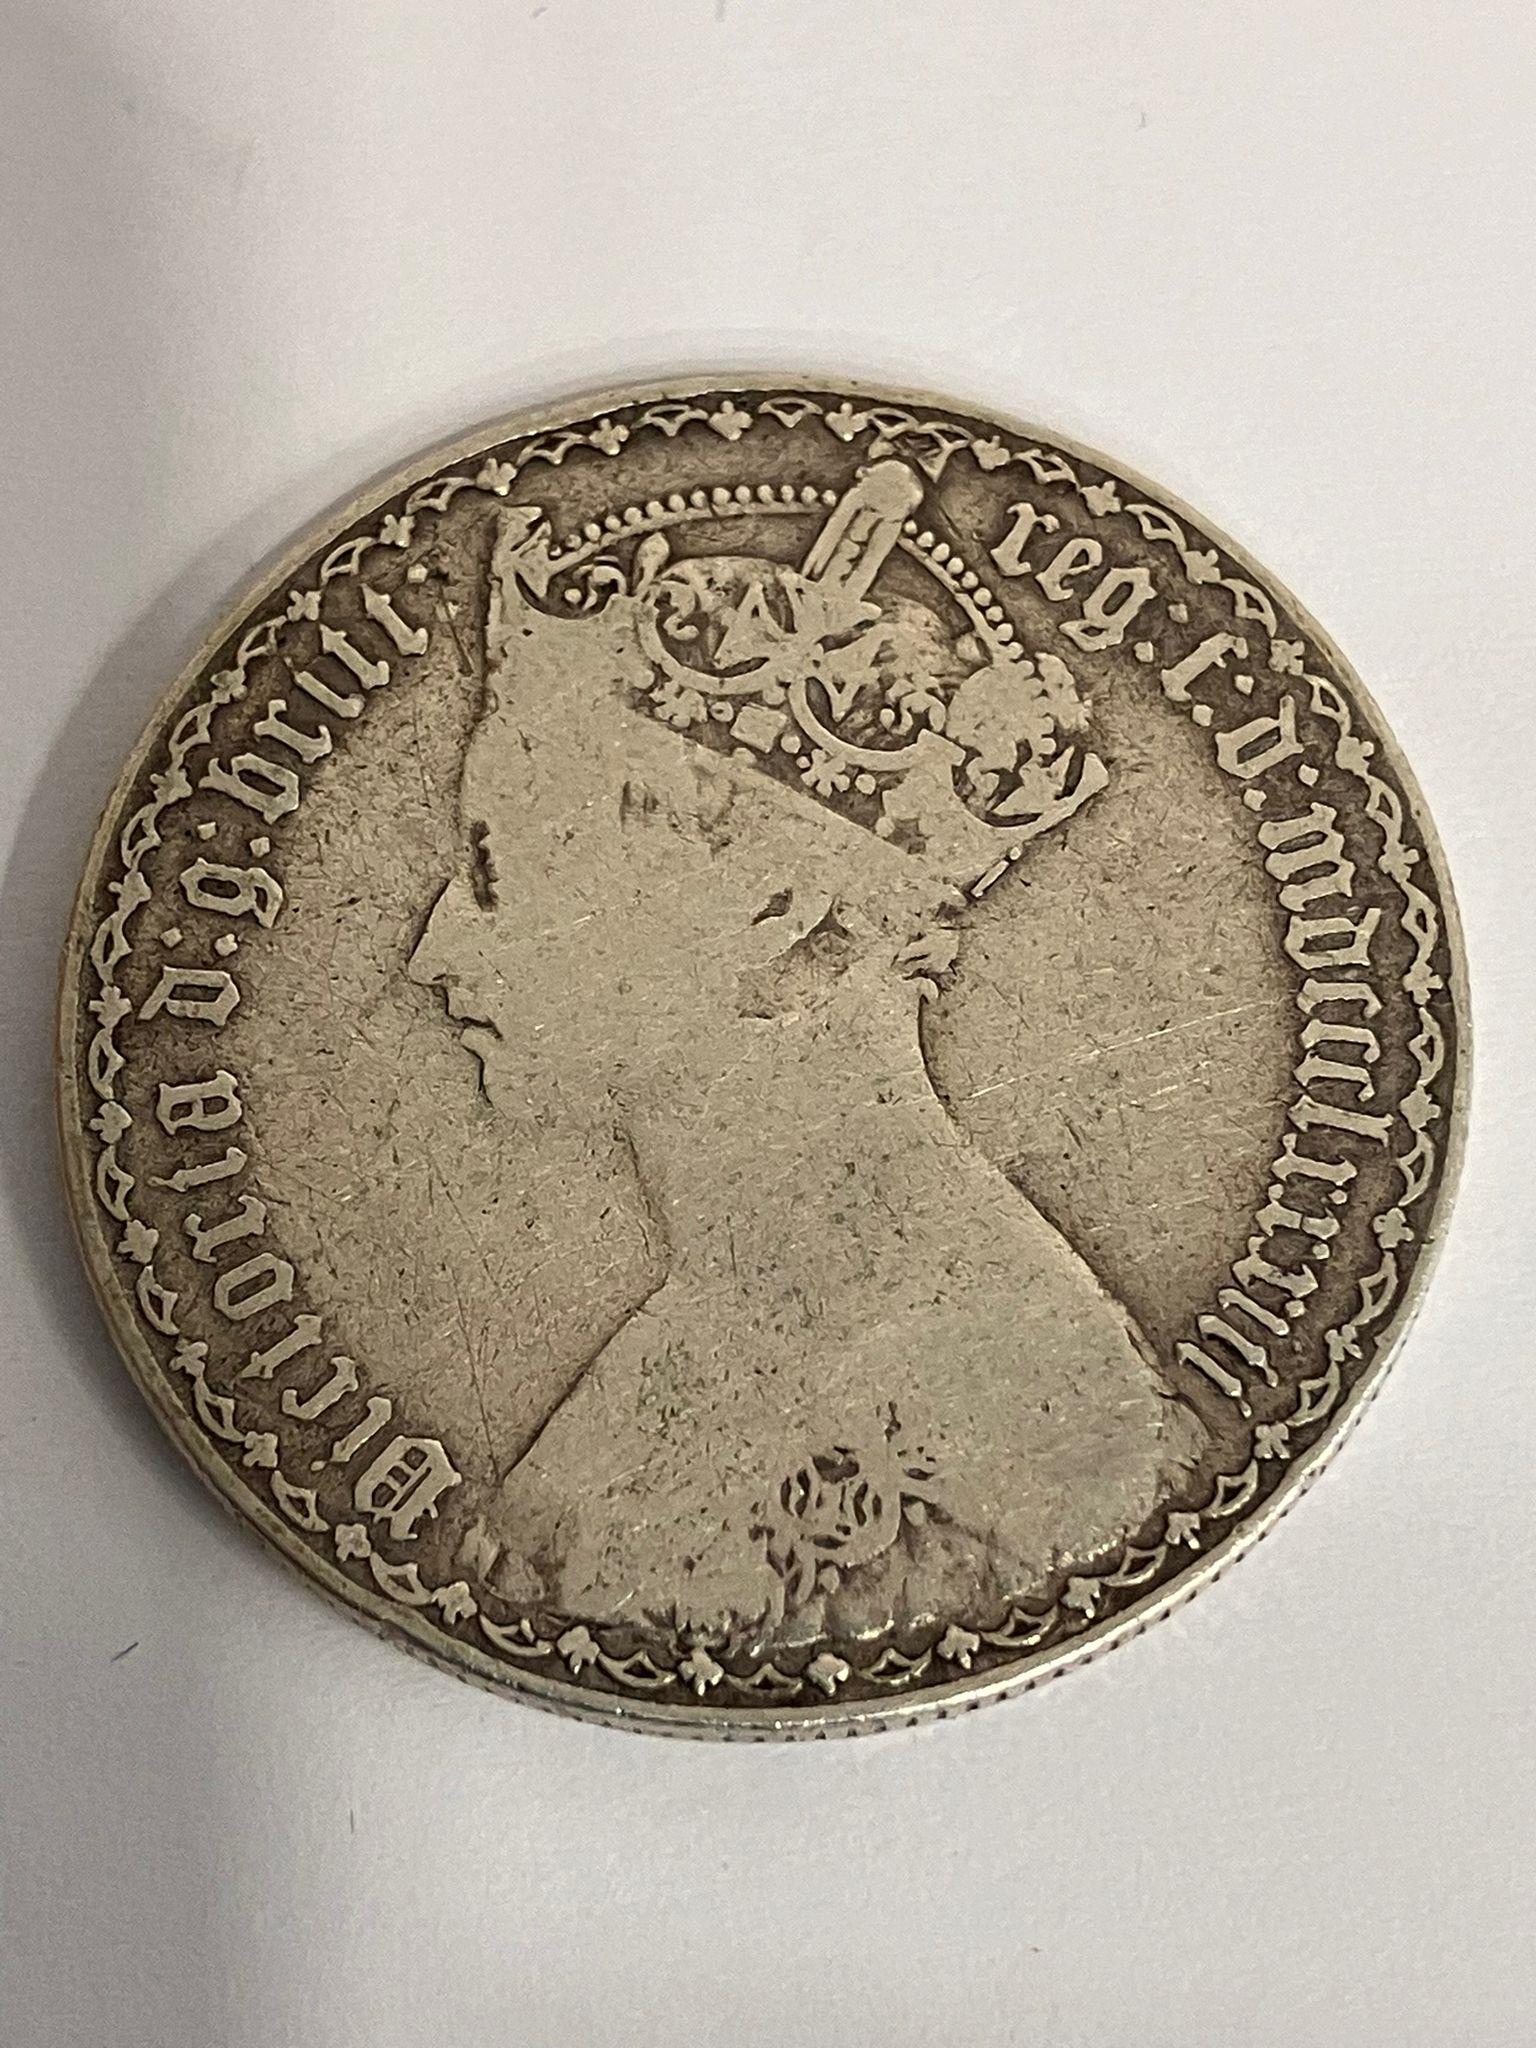 1883 SILVER GOTHIC FLORIN. Fine/Very Fine condition. - Image 3 of 3